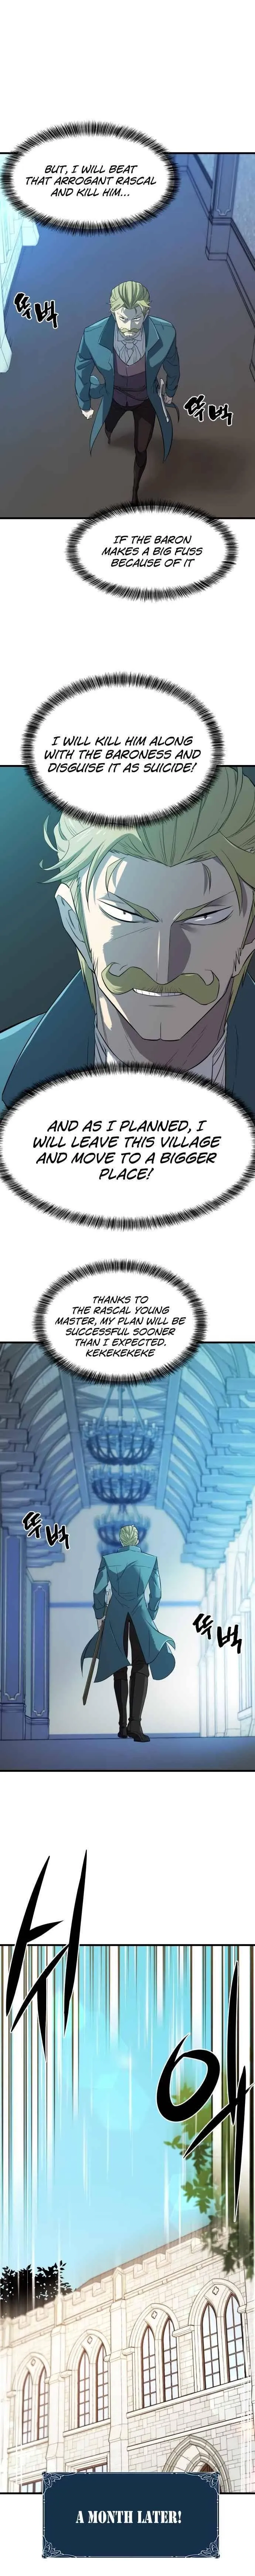 The Greatest Estate Developer Chapter 5 page 19